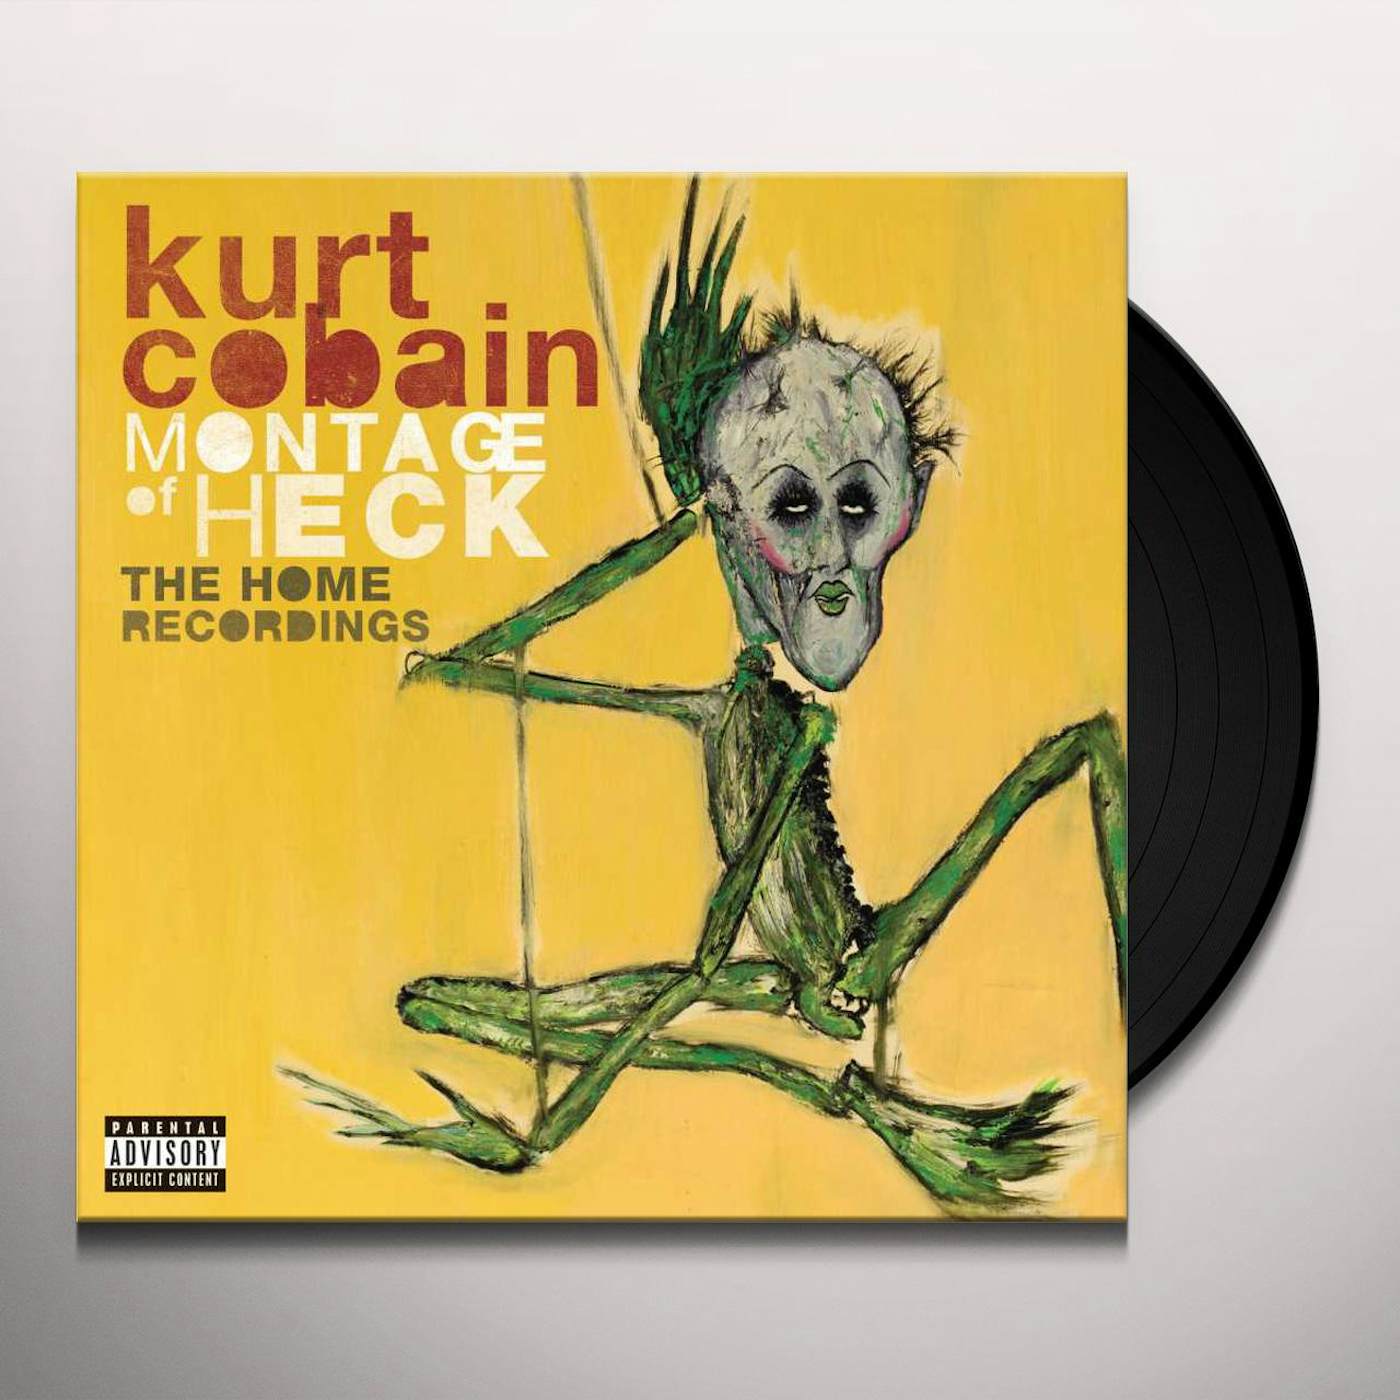 Kurt Cobain: Montage of Heck, The Home Recordings review – truly slim  pickings, even for superfans, Kurt Cobain